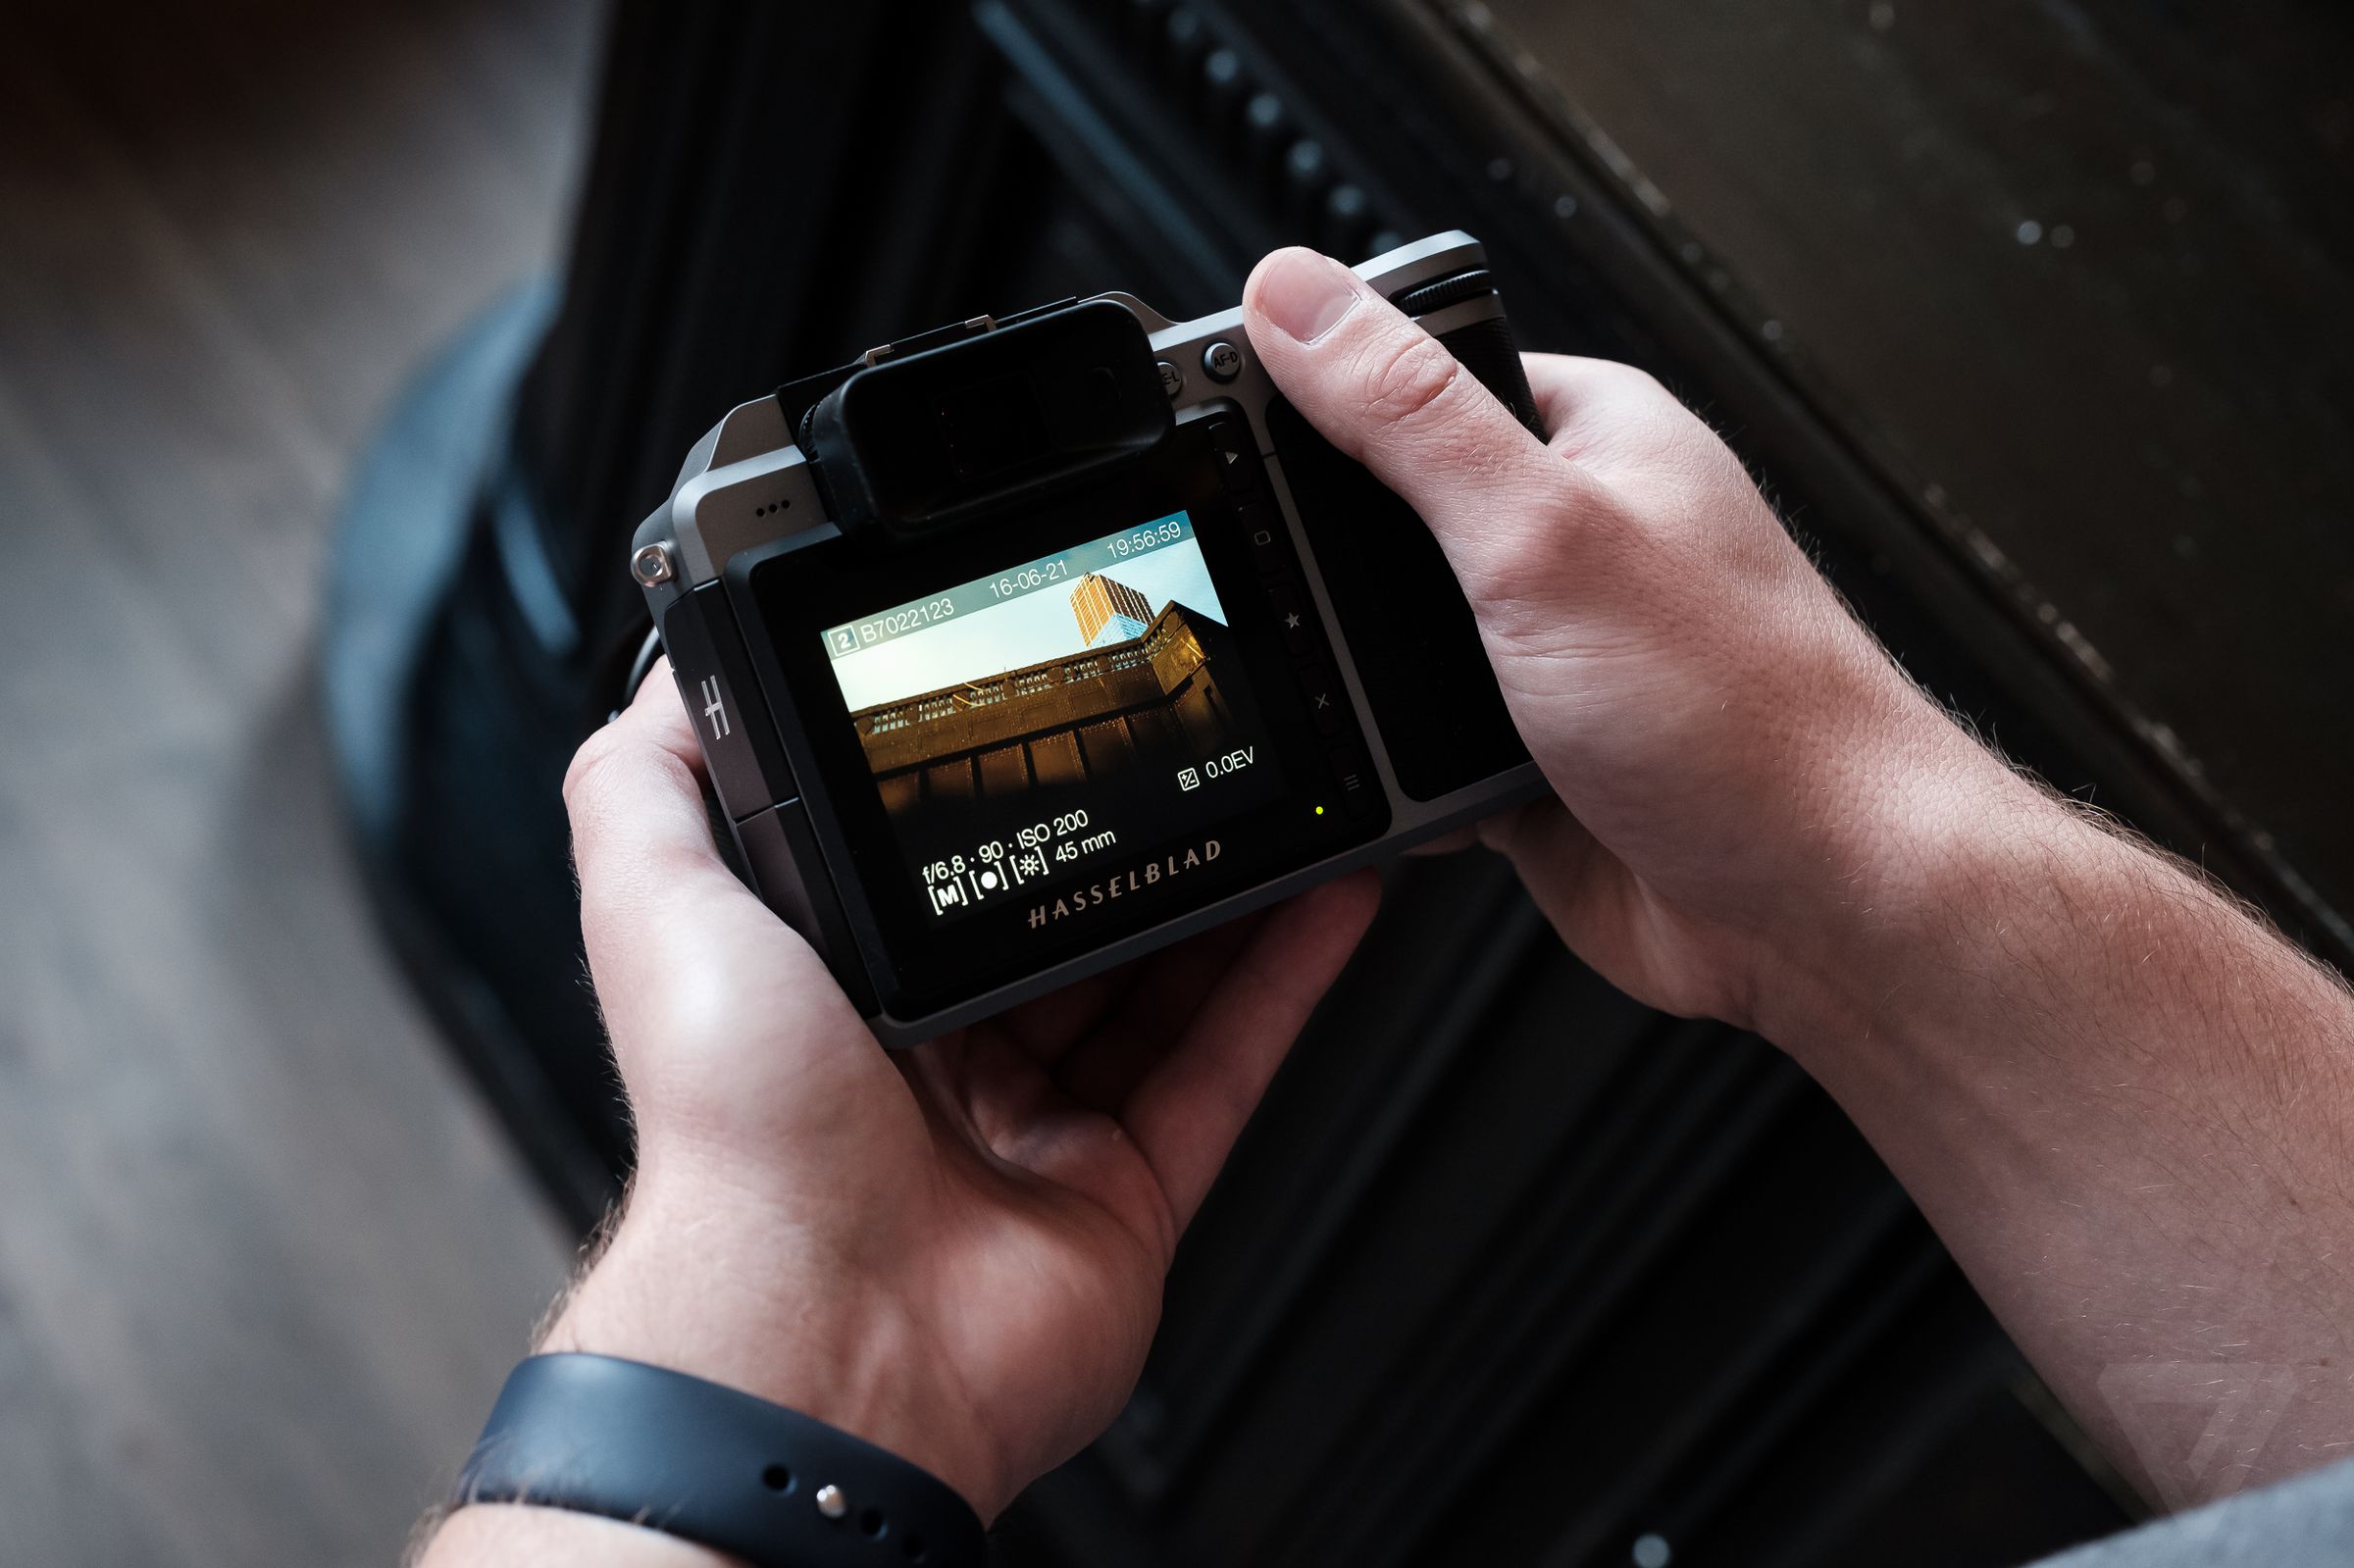 Hasselblad X1D hands on photos